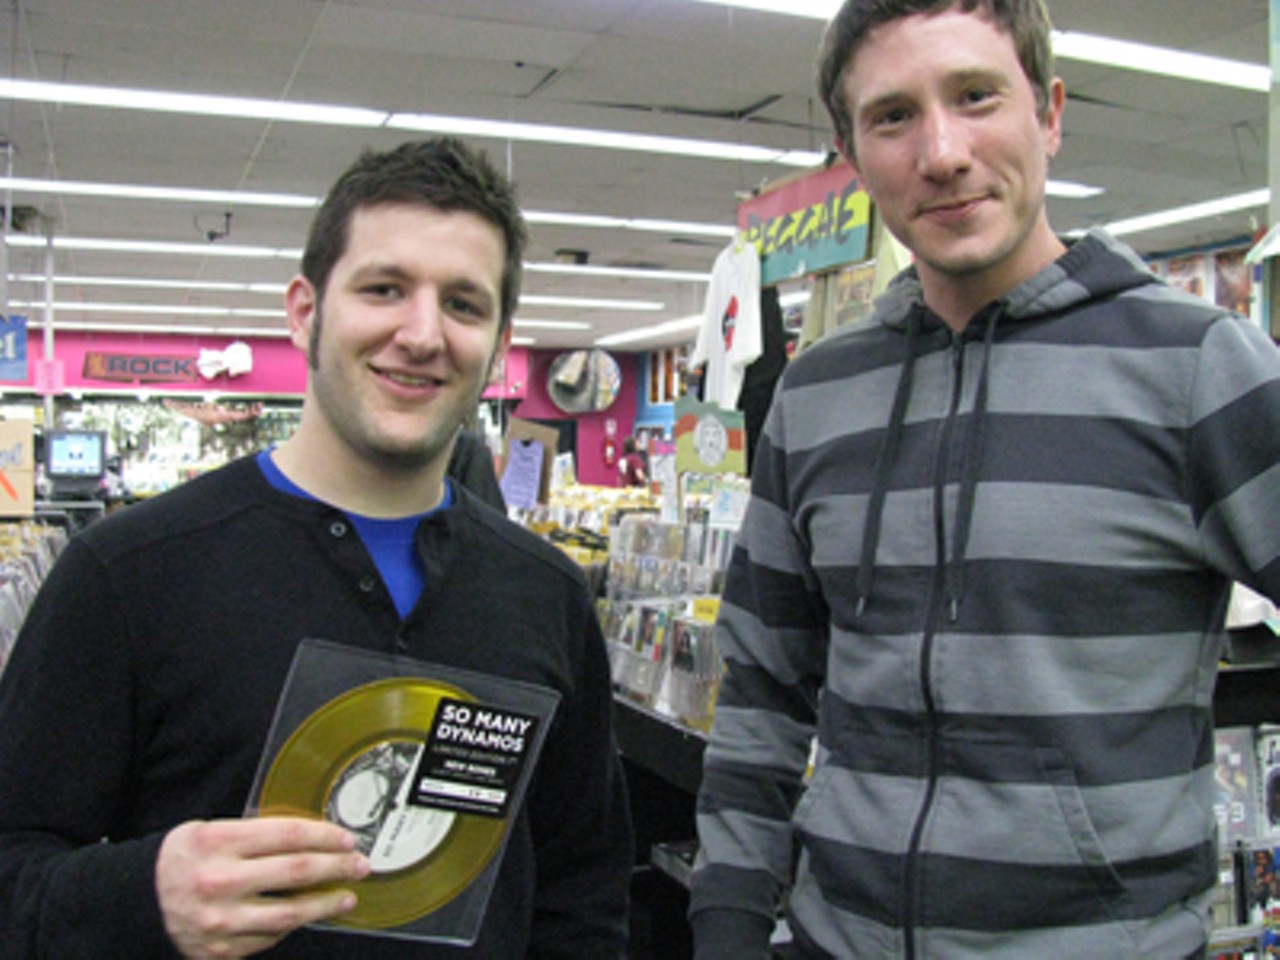 Heroes of the Kingdom/Ring, Cicada vocalist Christian Powell (right) and pal spent some time (and cash) at Vintage Vinyl. Powell snagged the new Mastodon CD.